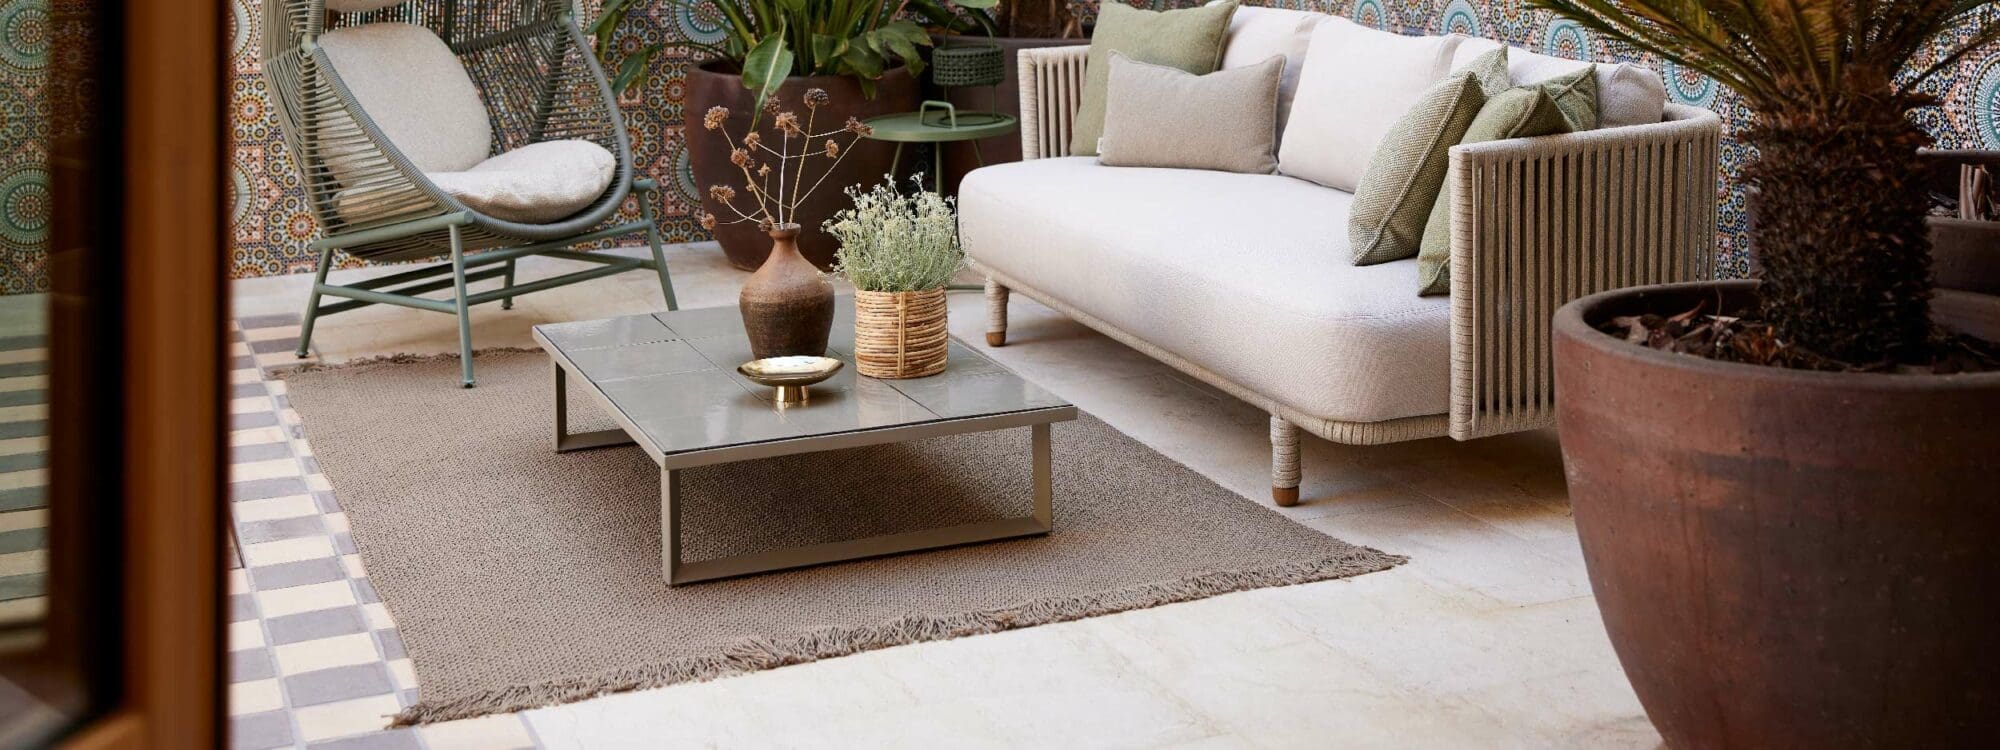 Image of Moments garden sofa and Glaze low table, both placed on Knit outdoor rug by Cane-line